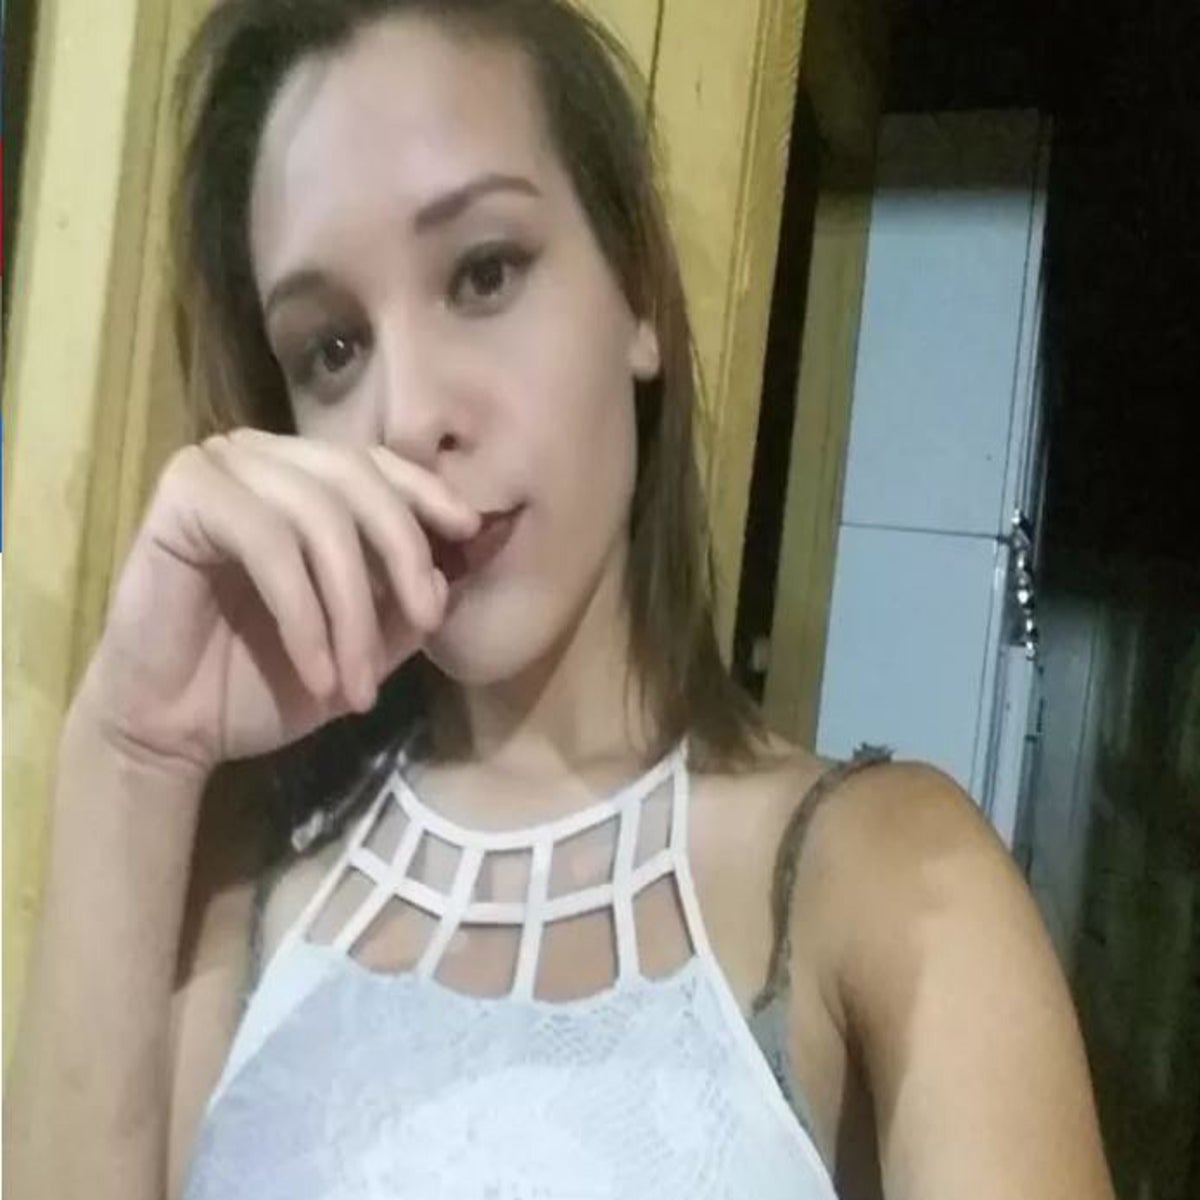 Brazilian Girls Porn - Teenage girl kills herself amid rumours ex-boyfriend posted 'intimate'  pictures of her online | The Independent | The Independent